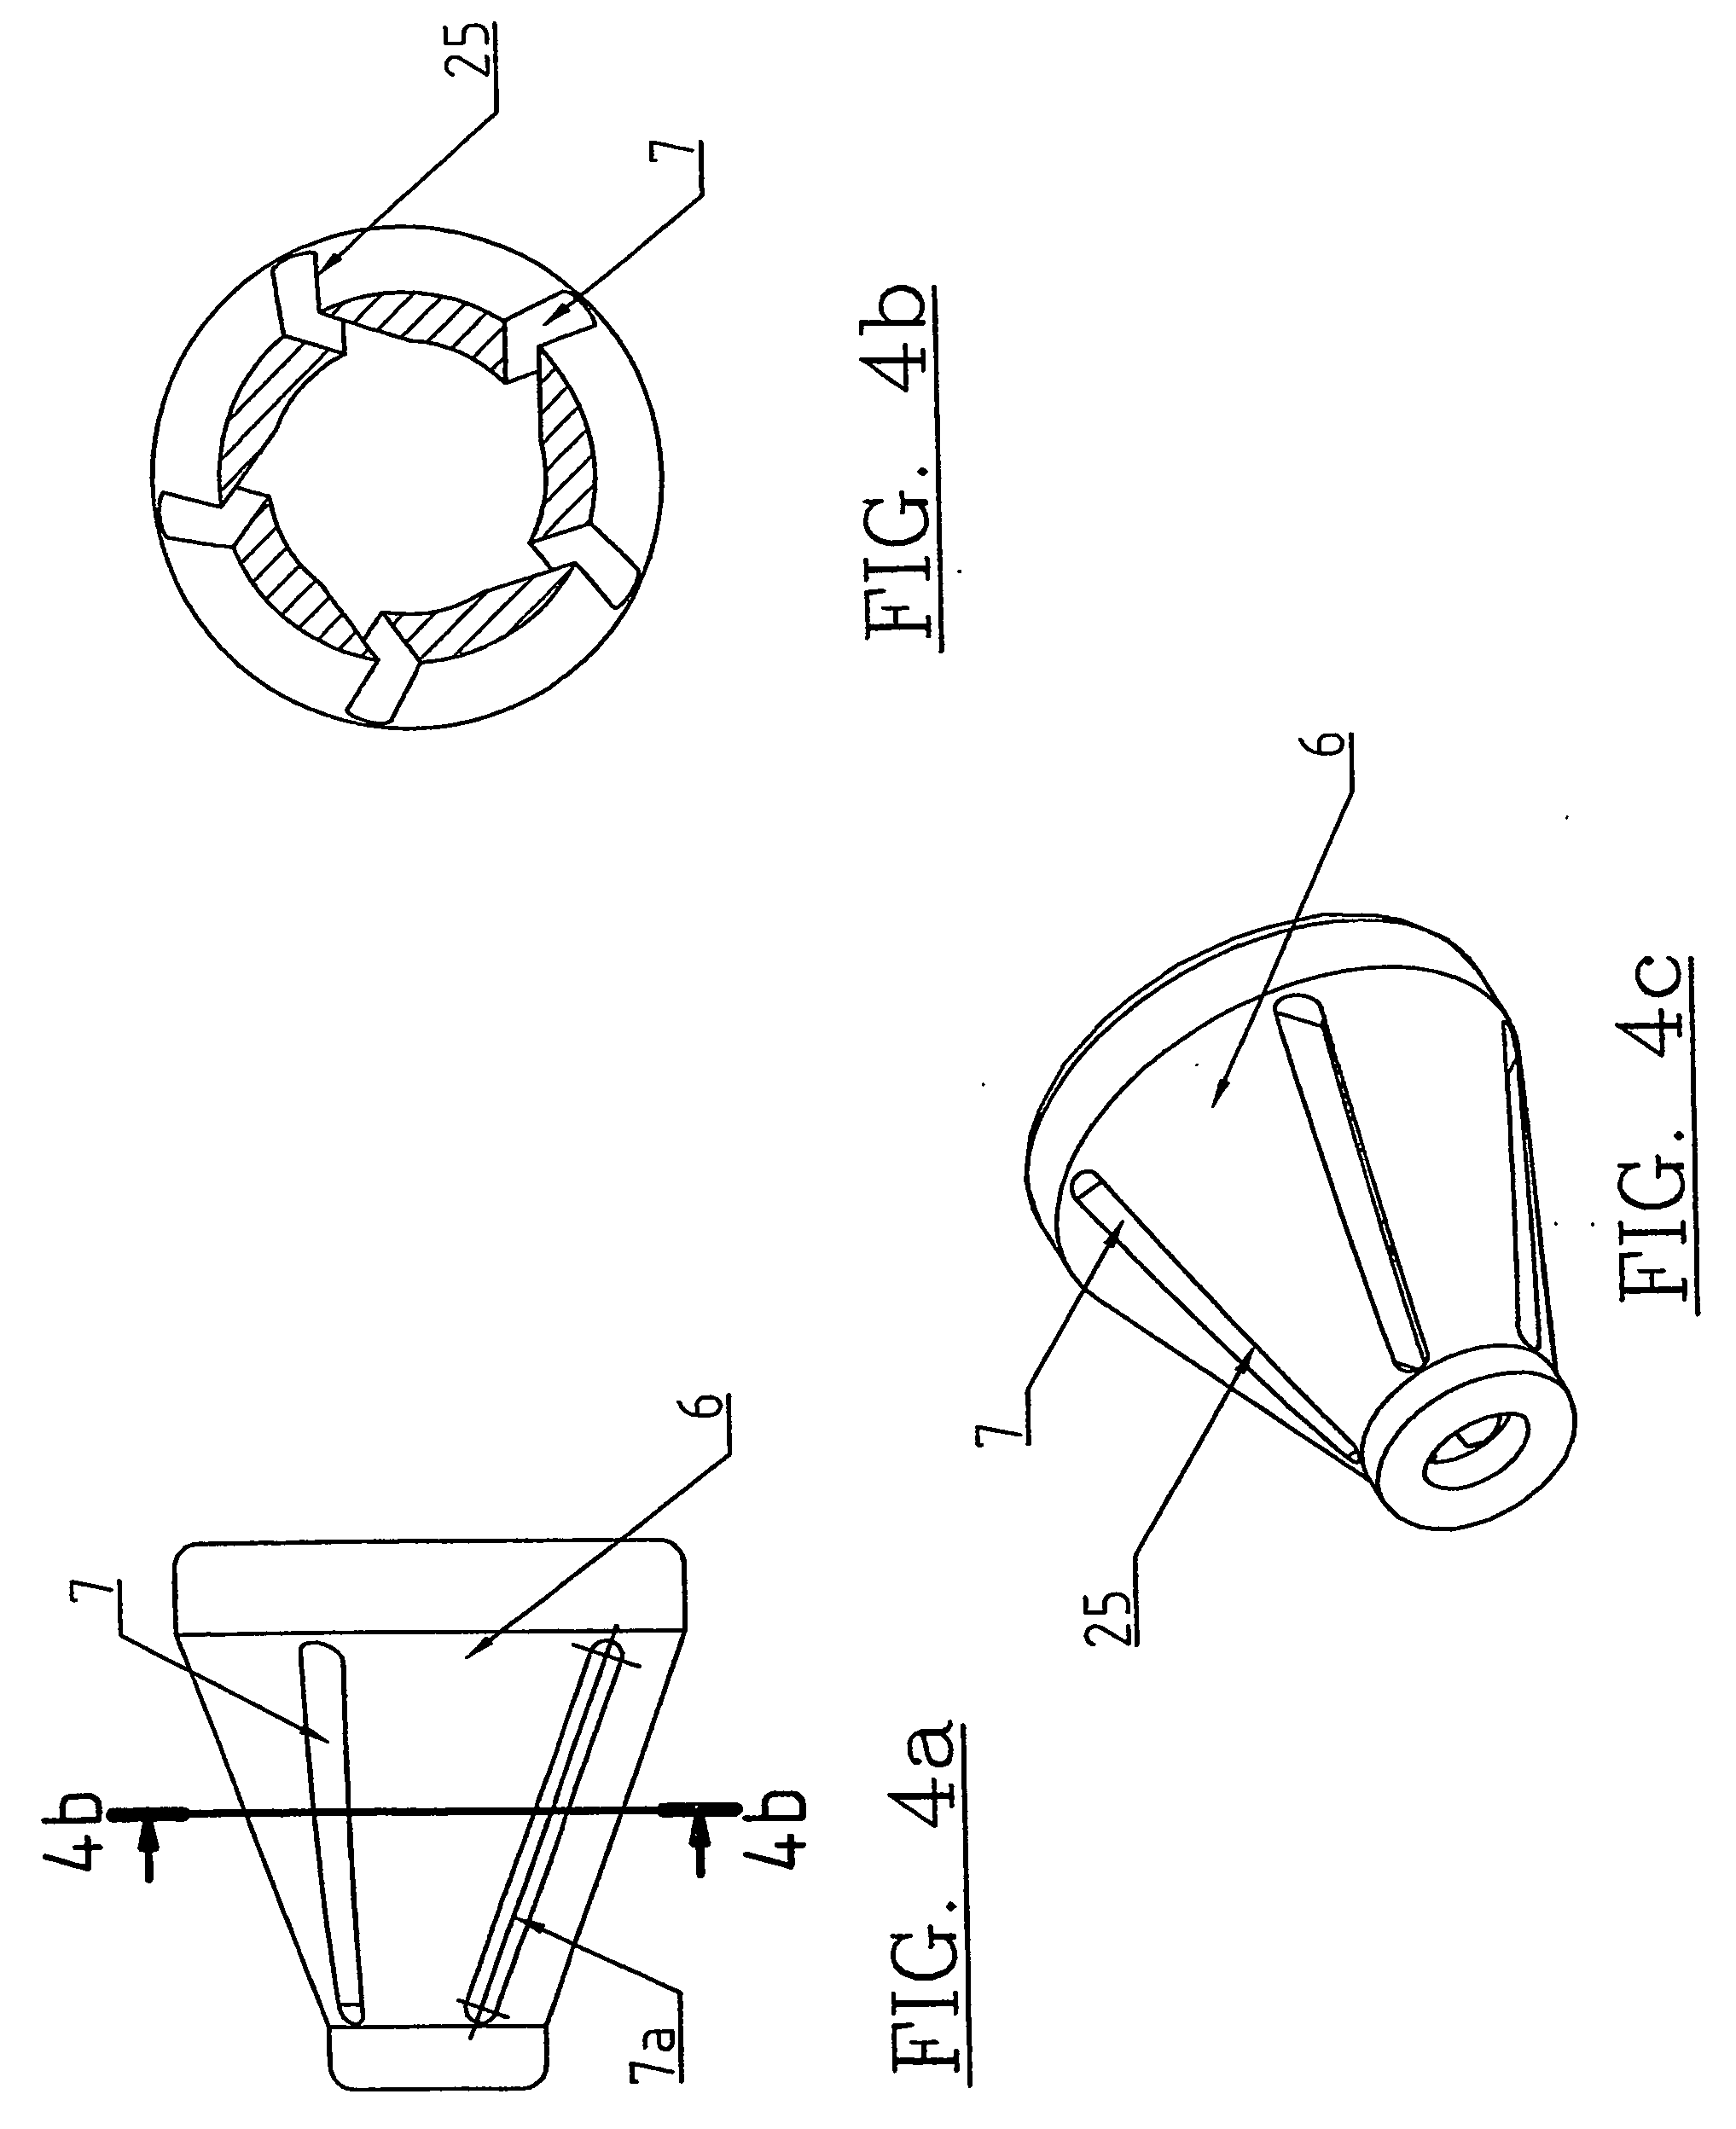 Atherectomy system with imaging guidewire